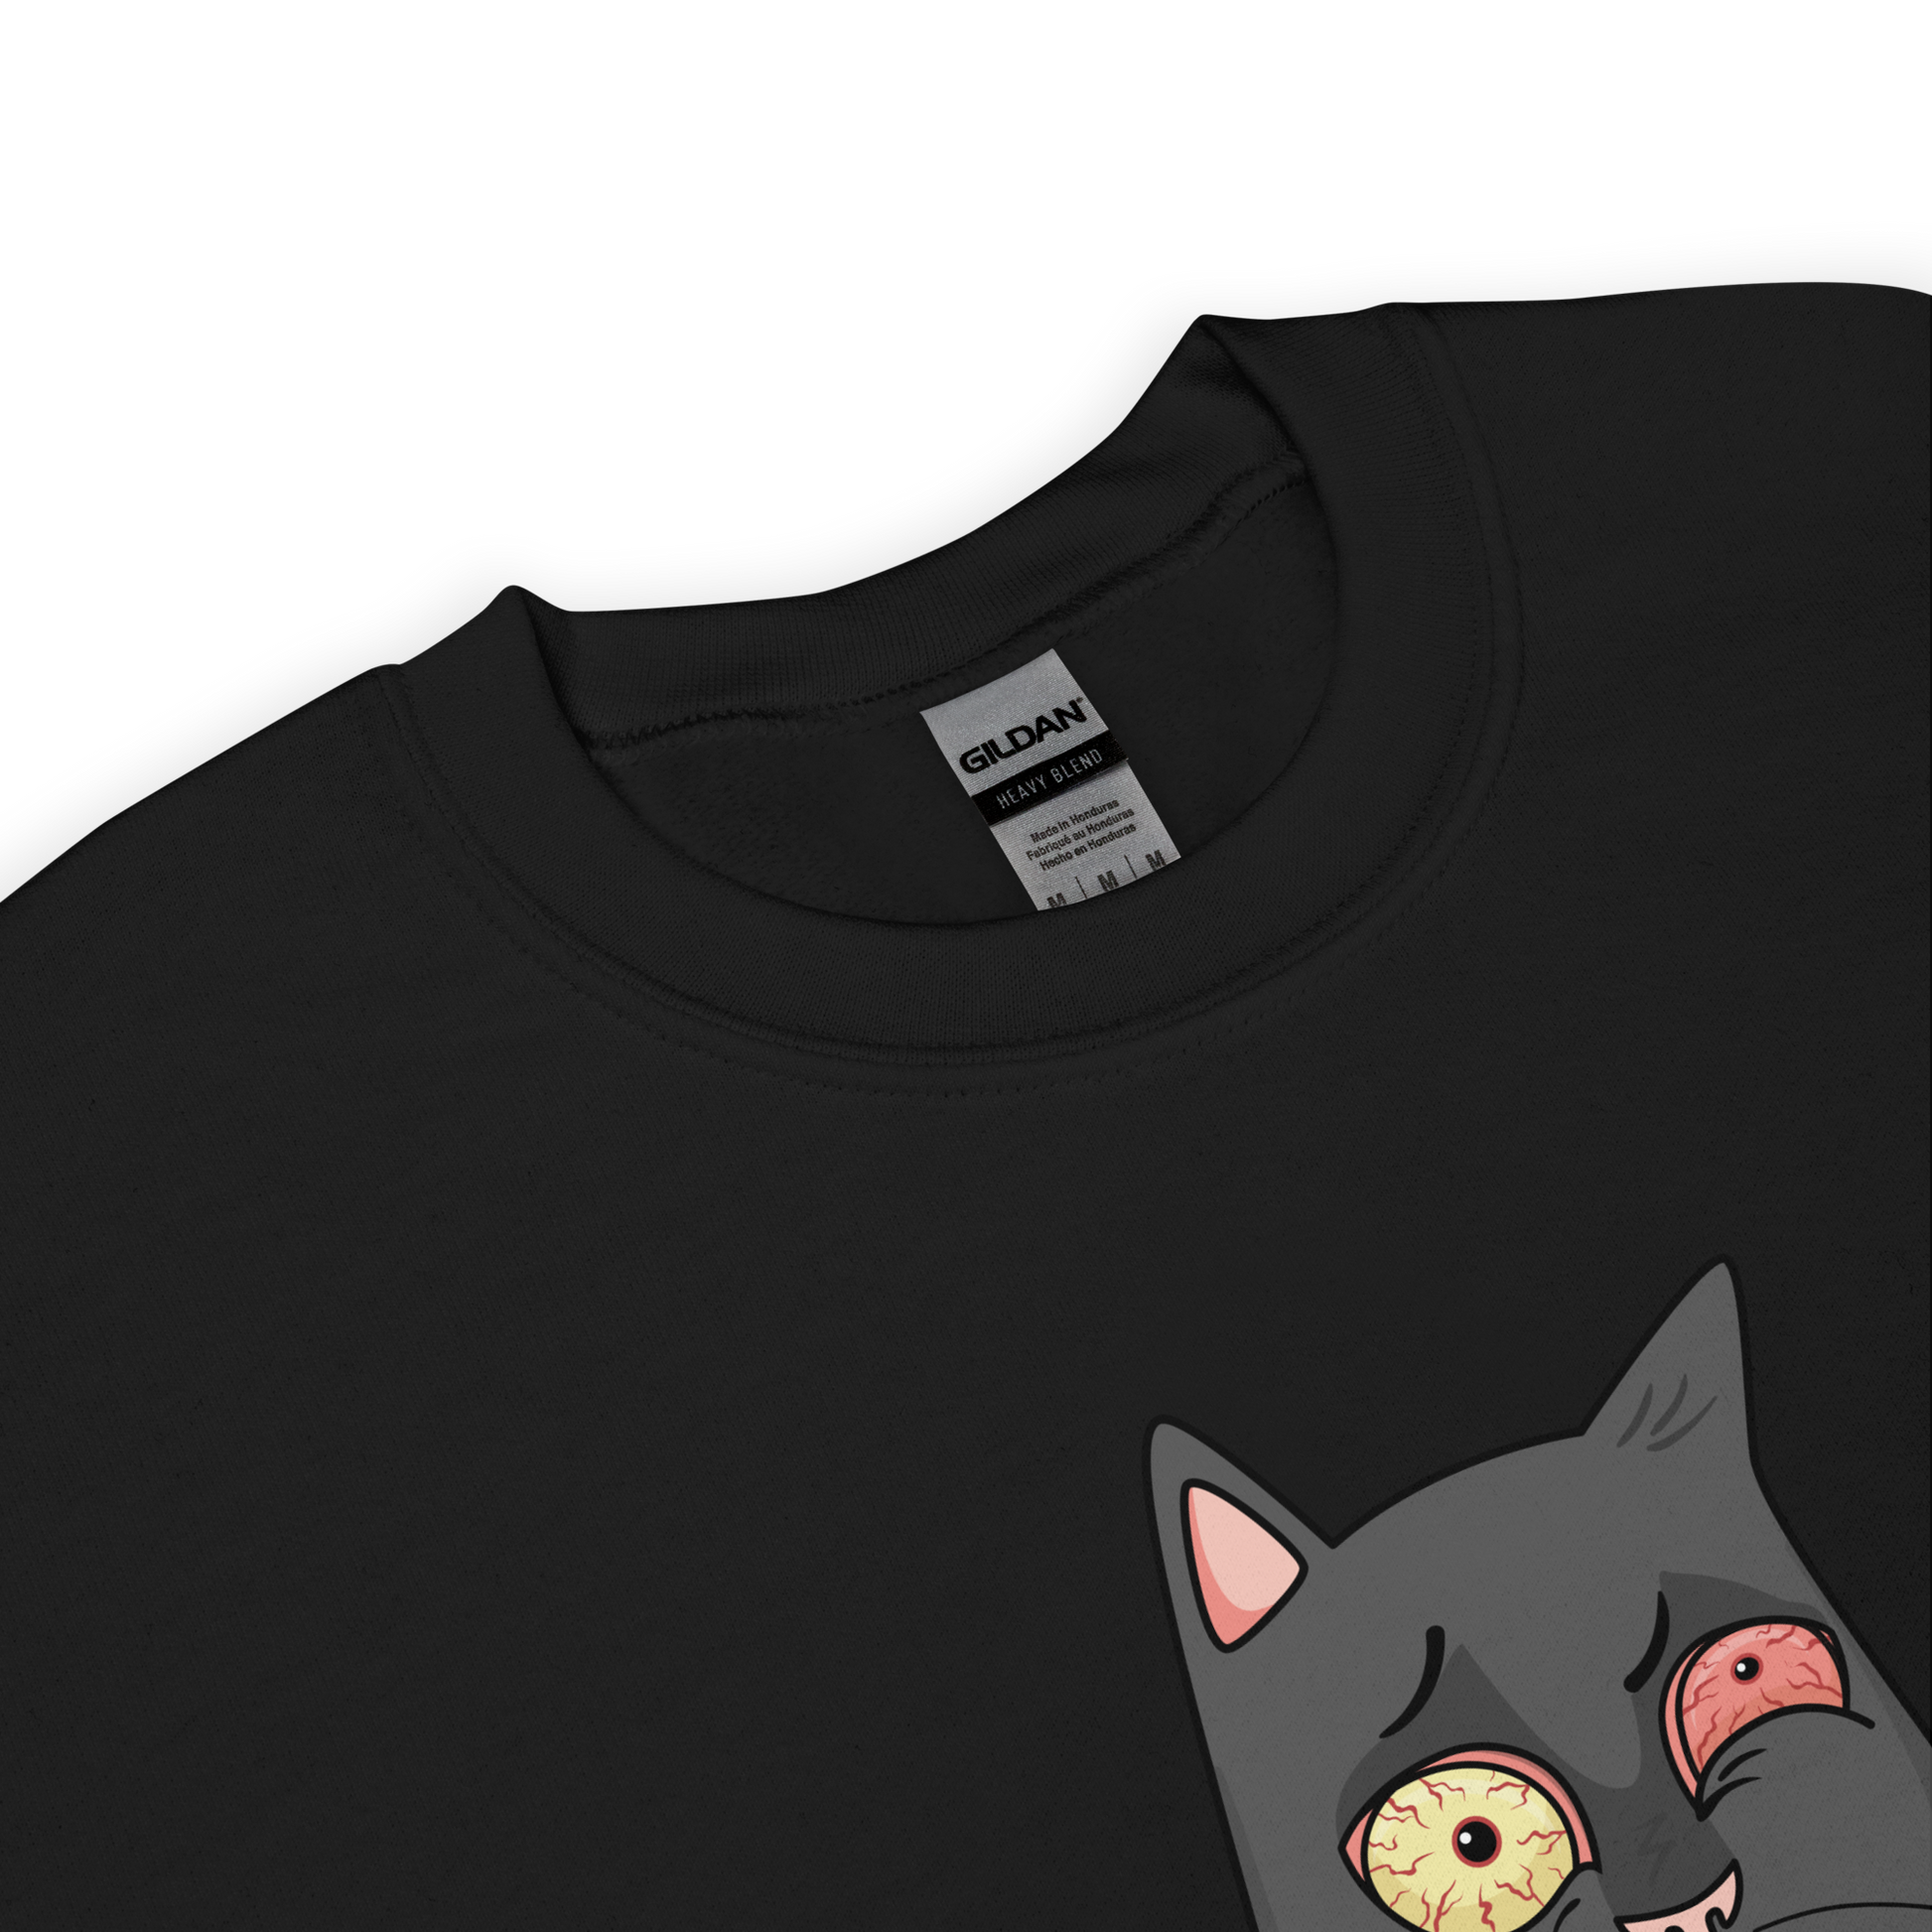 Product details of a Black Cat Sweatshirt featuring a hilarious Life Begins After Coffee graphic on the chest - Funny Graphic Cat Sweatshirts - Boozy Fox